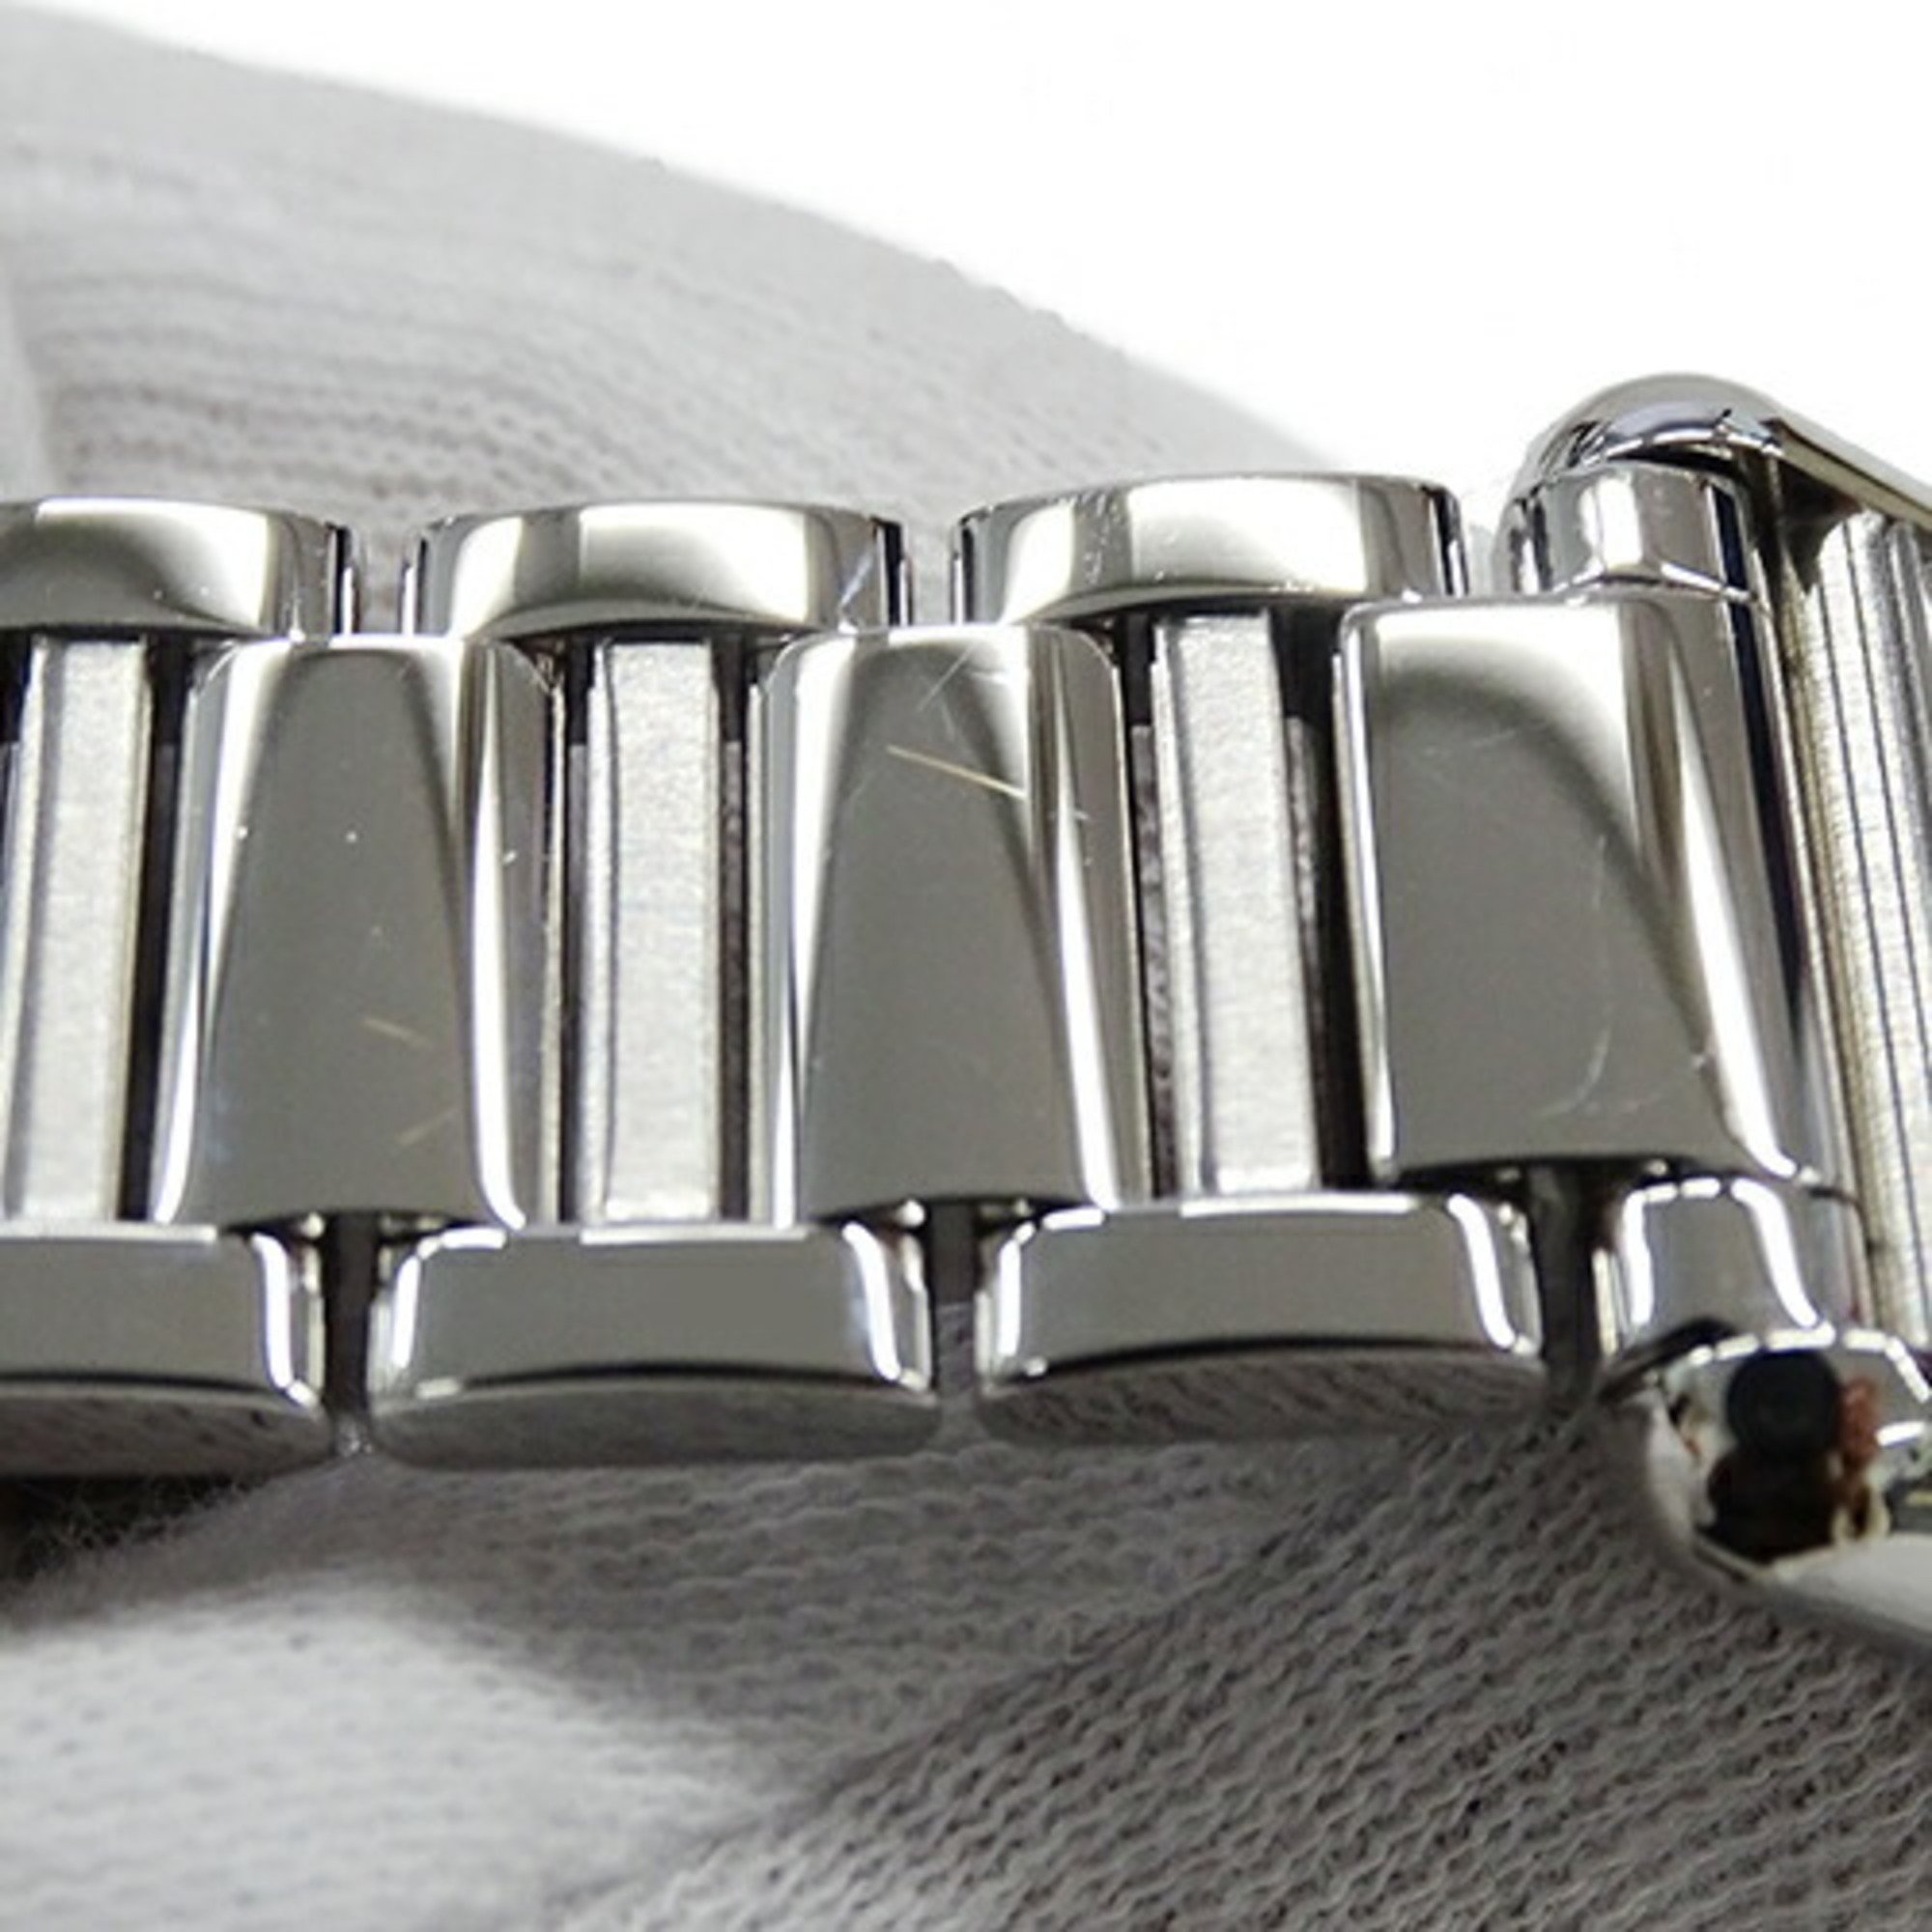 Cartier Watch Ladies Brand Tank Must SM Quartz QZ Stainless Steel SS WSTA0051 Silver Square Polished